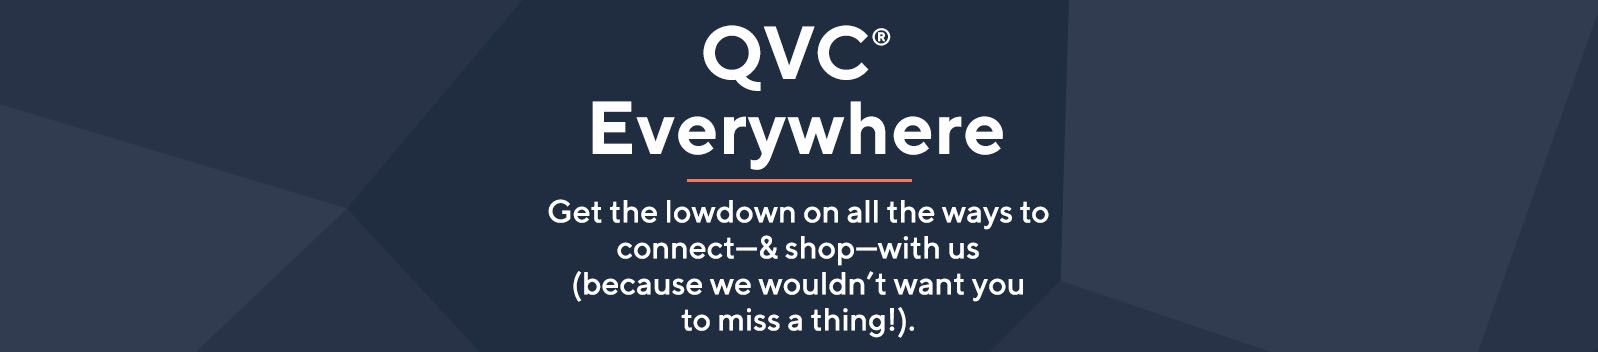 QVC® Everywhere. Get the lowdown on all the ways to connect—& shop—with us (because we wouldn’t want you to miss a thing!).